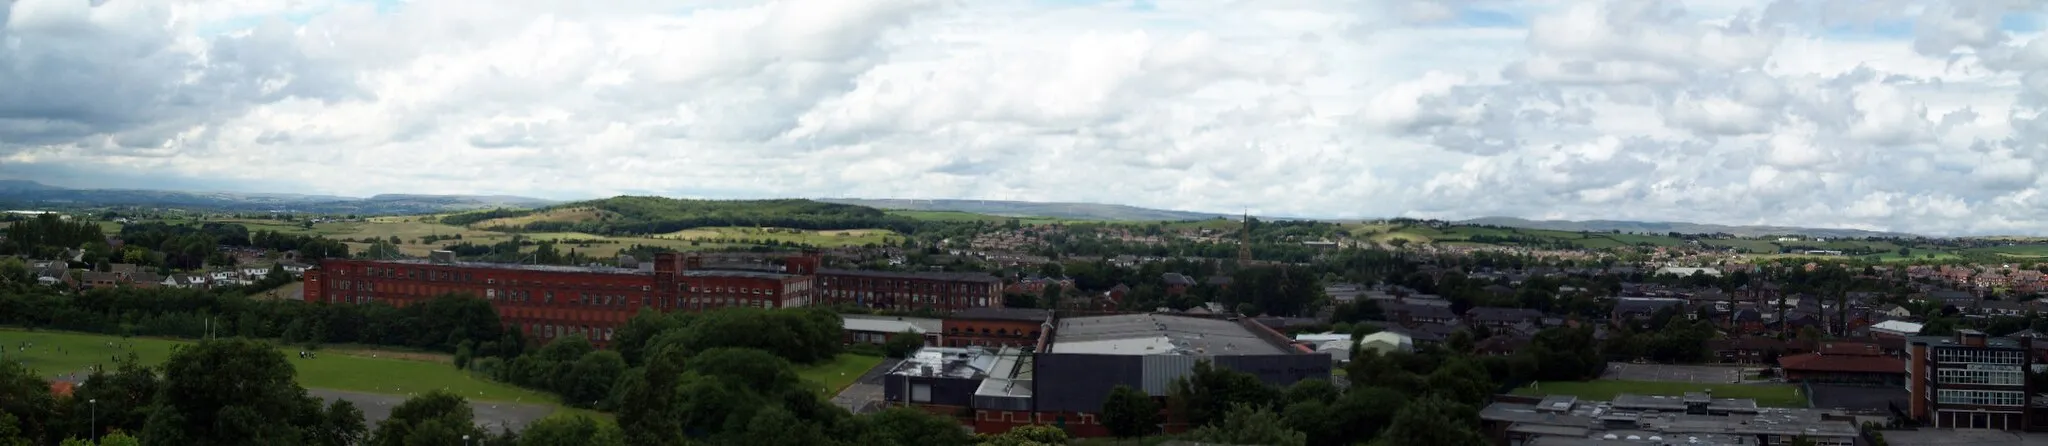 Photo showing: View from St Annes Church tower Royton, Oldham